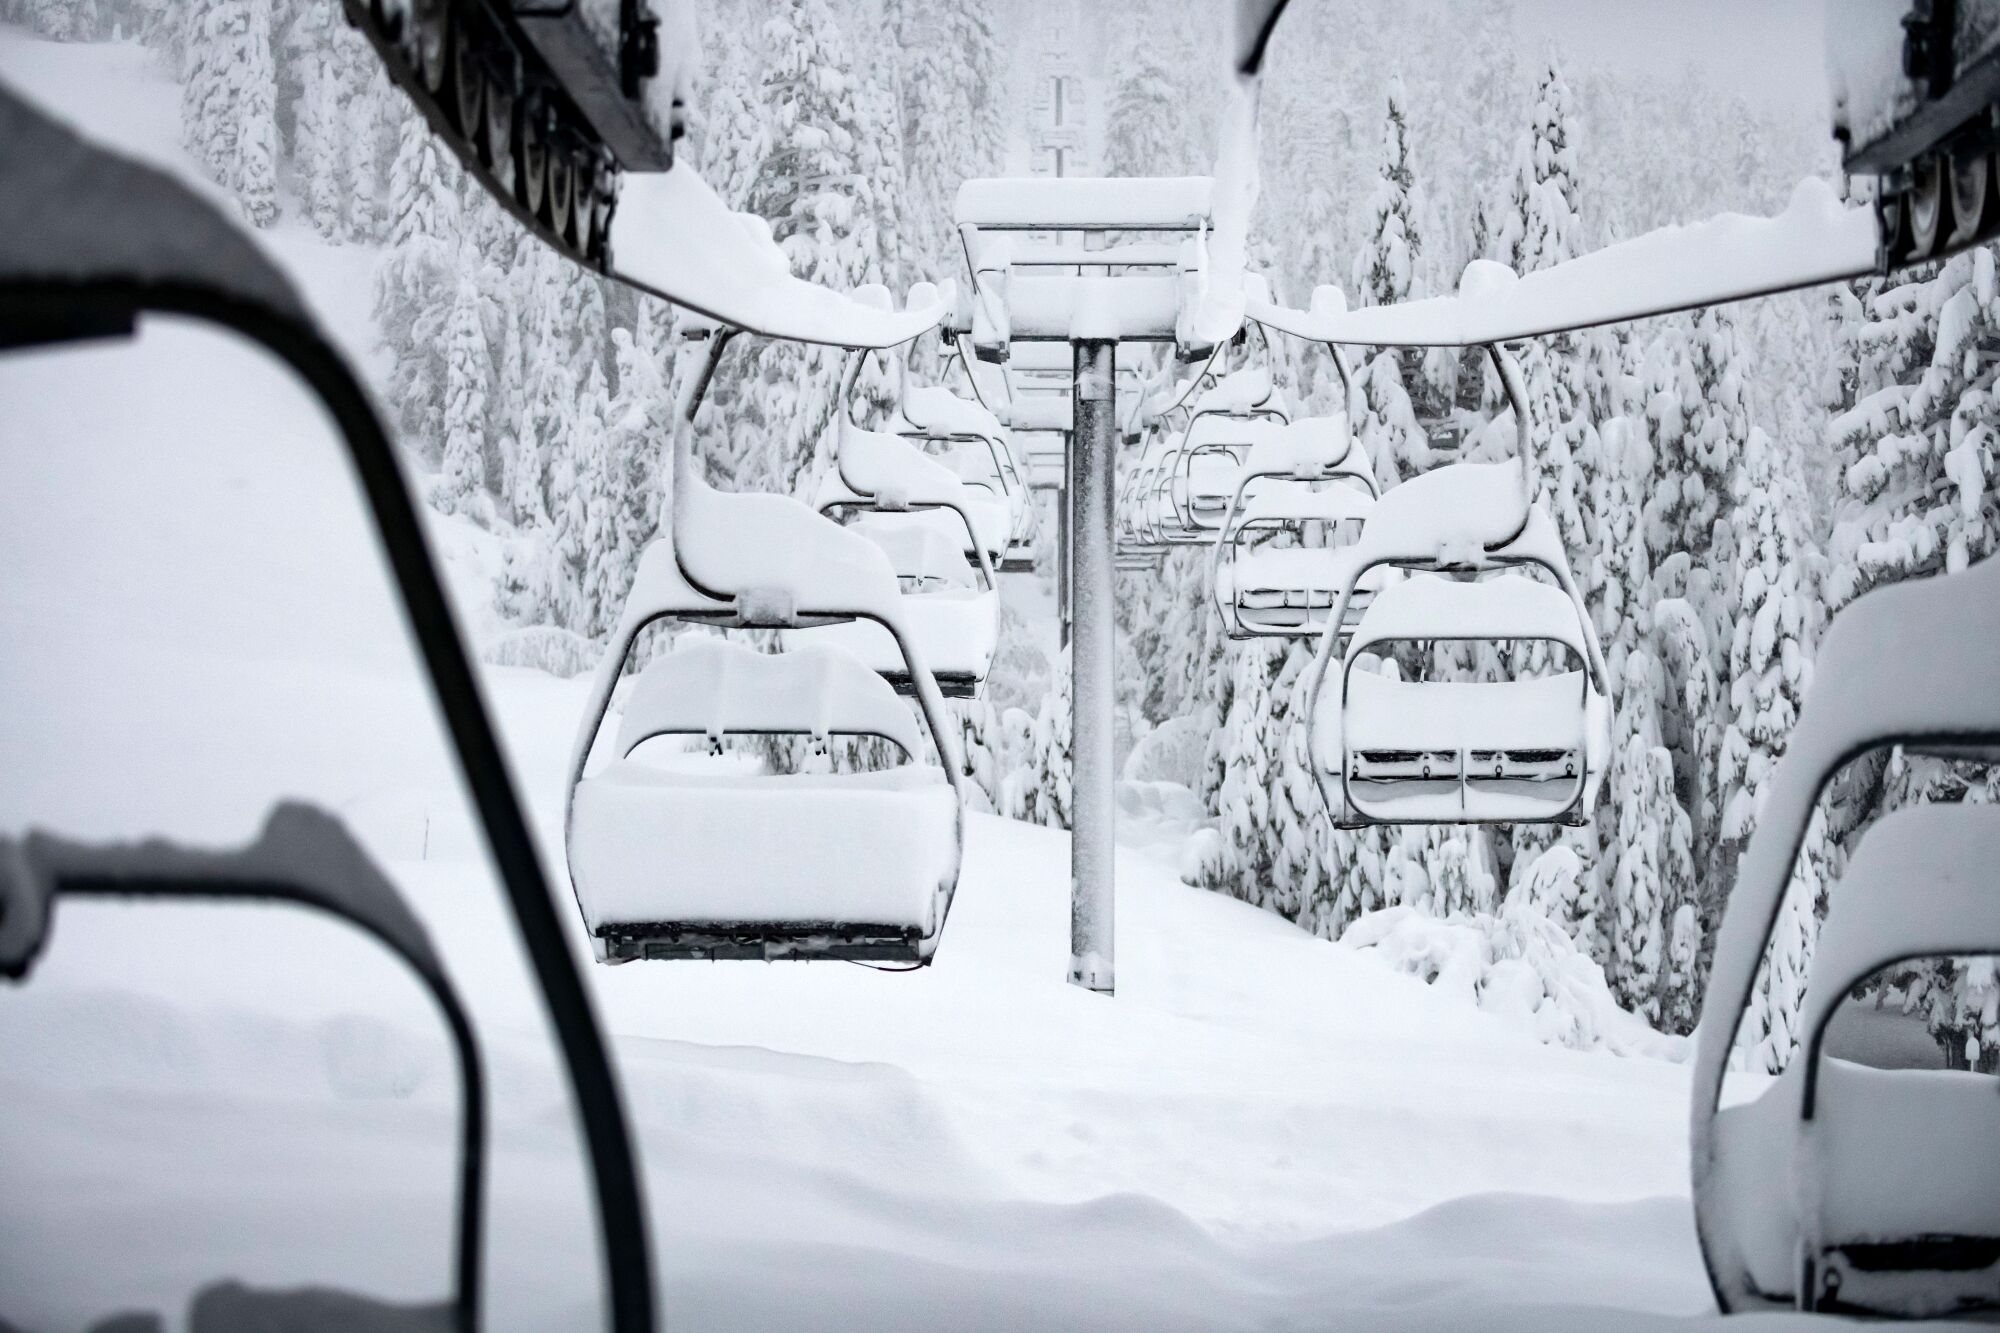 The storm door has swung wide open in the Sierras, where Palisades Tahoe received 2 feet of snow